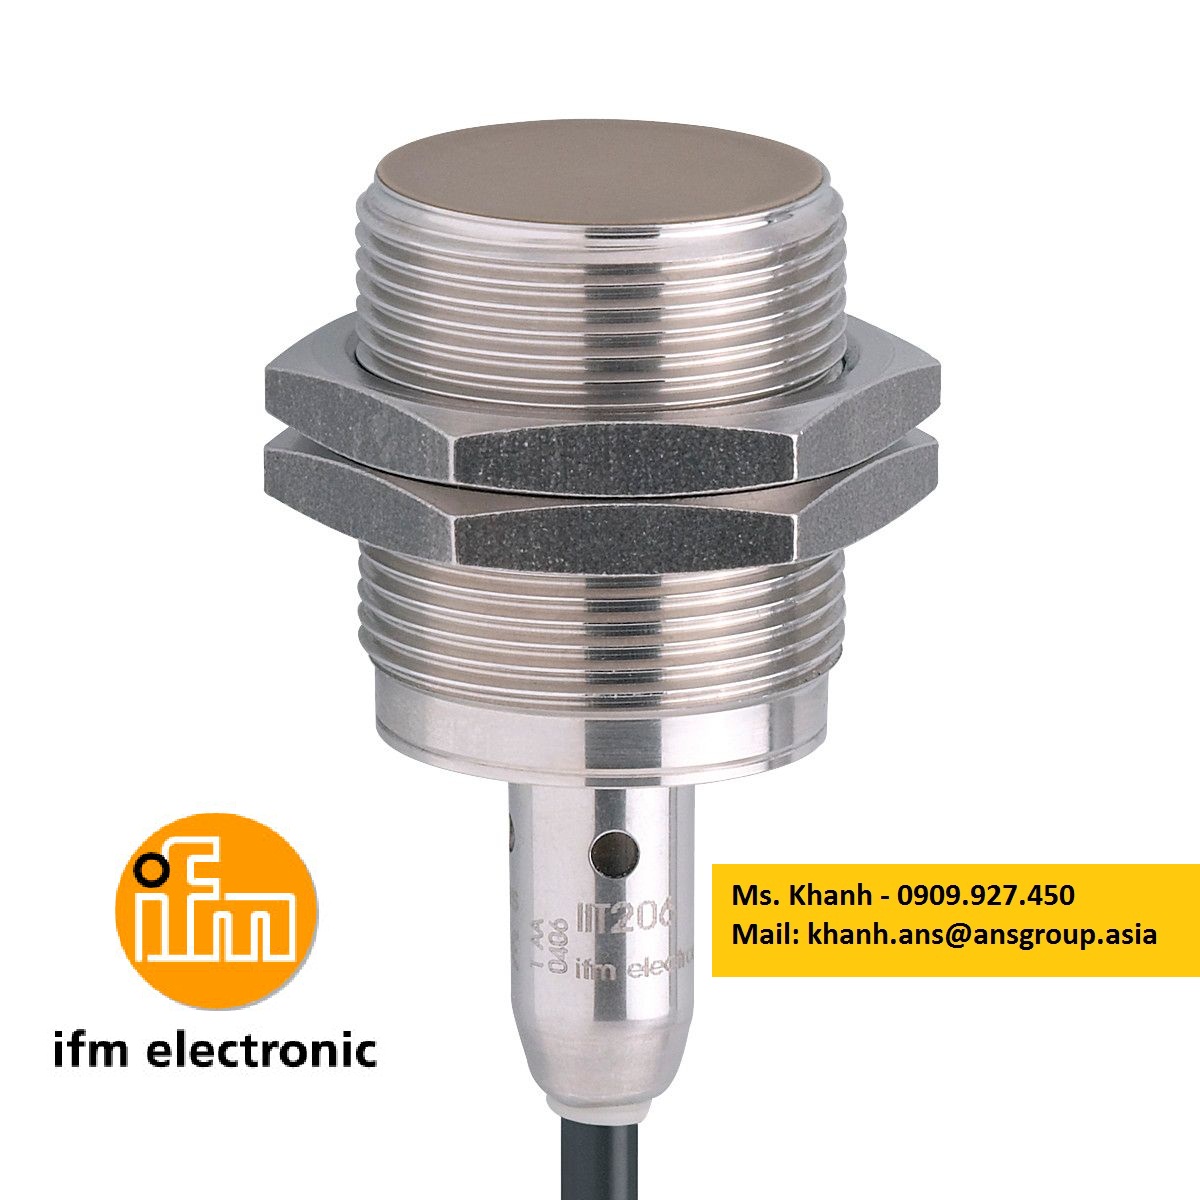 proximity-switch-ift206-ifm.png